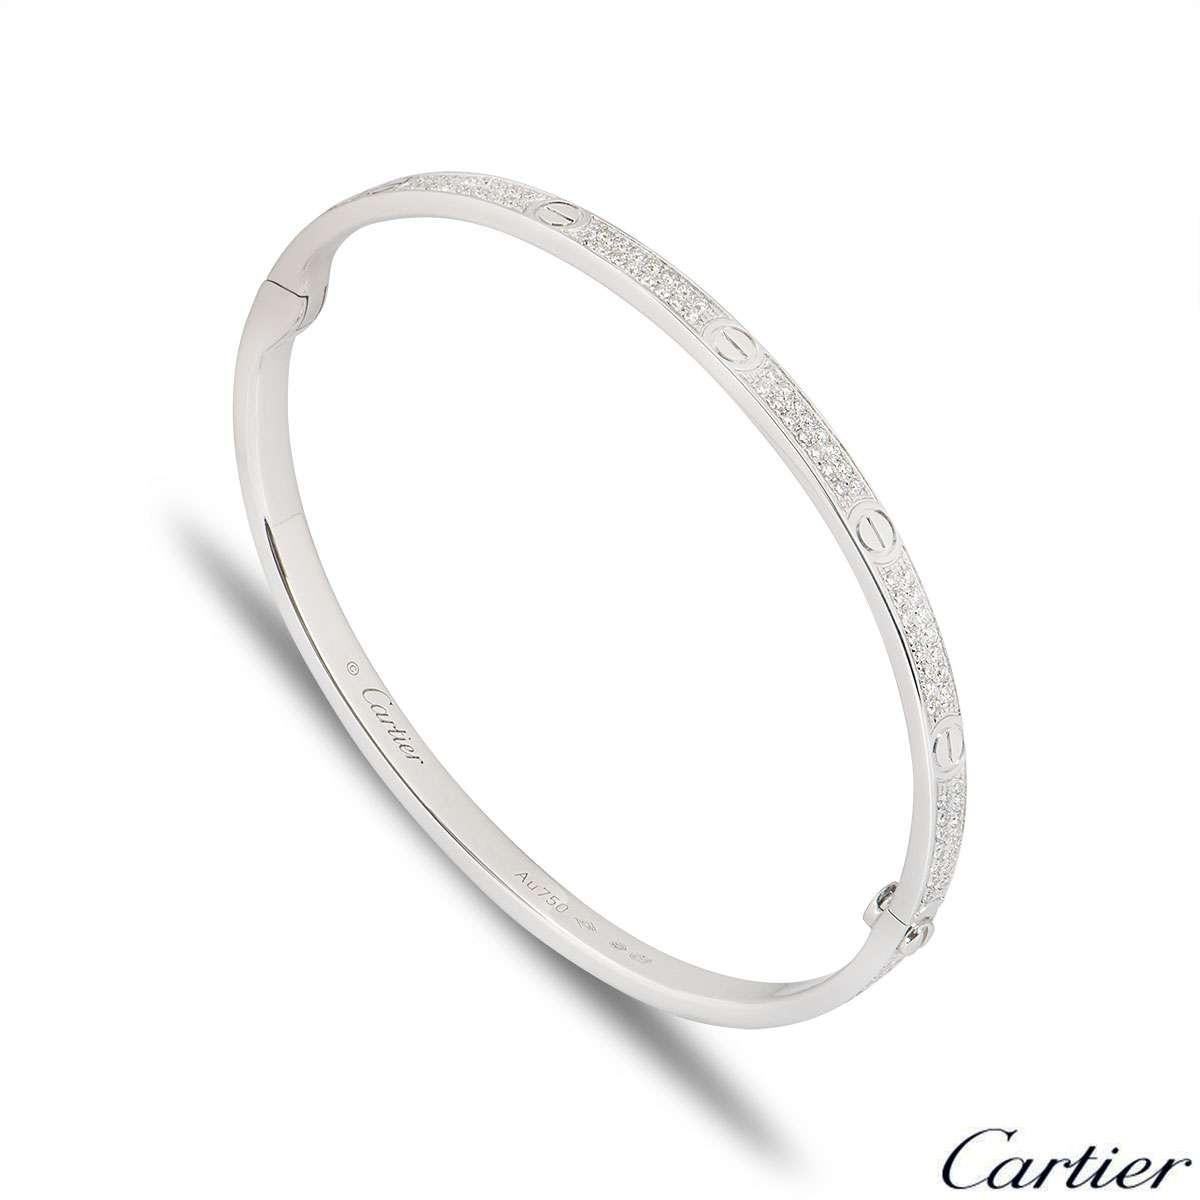 A sparkly 18k white gold diamond Cartier bracelet from the Love collection. The bracelet comprises of the iconic screw motifs around the outer edge complemented with 177 round brilliant cut pave set diamonds in between. The diamonds have a total